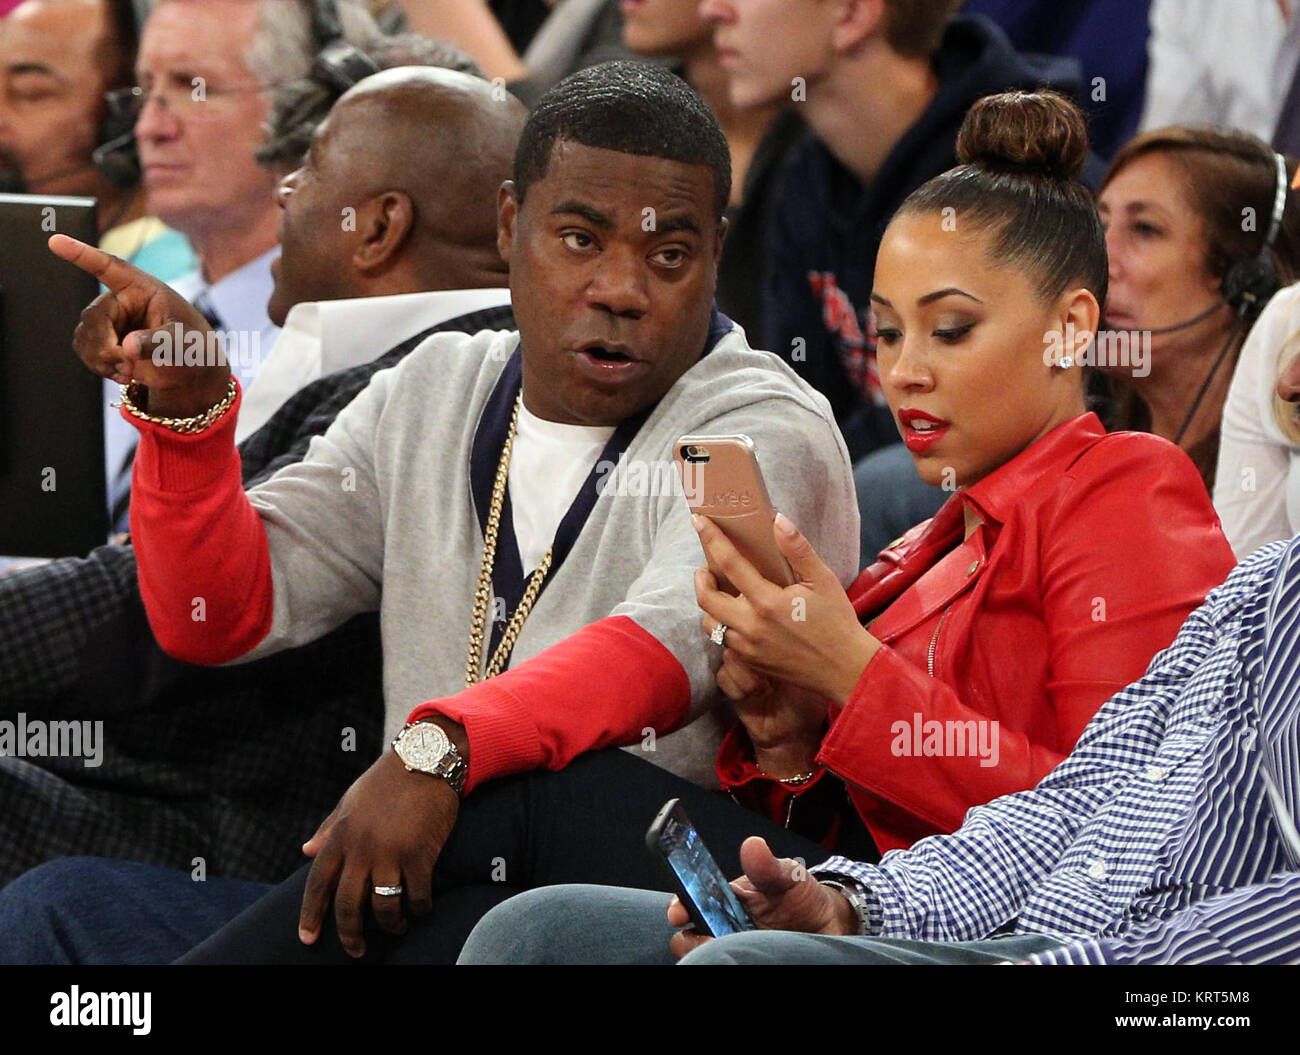 NEW YORK, NY - NOVEMBER 08: (Embargoed till November 10, 2015) Magic Johnson, Tracy Morgan with wife Megan Wollover sit with Michael K. Williams and  Director Spike Lee at the New York Knicks vs Los Angeles Lakers game at Madison Square Garden on November 8, 2015 in New York City.   People:  Tracy Morgan, Megan Wollover Stock Photo